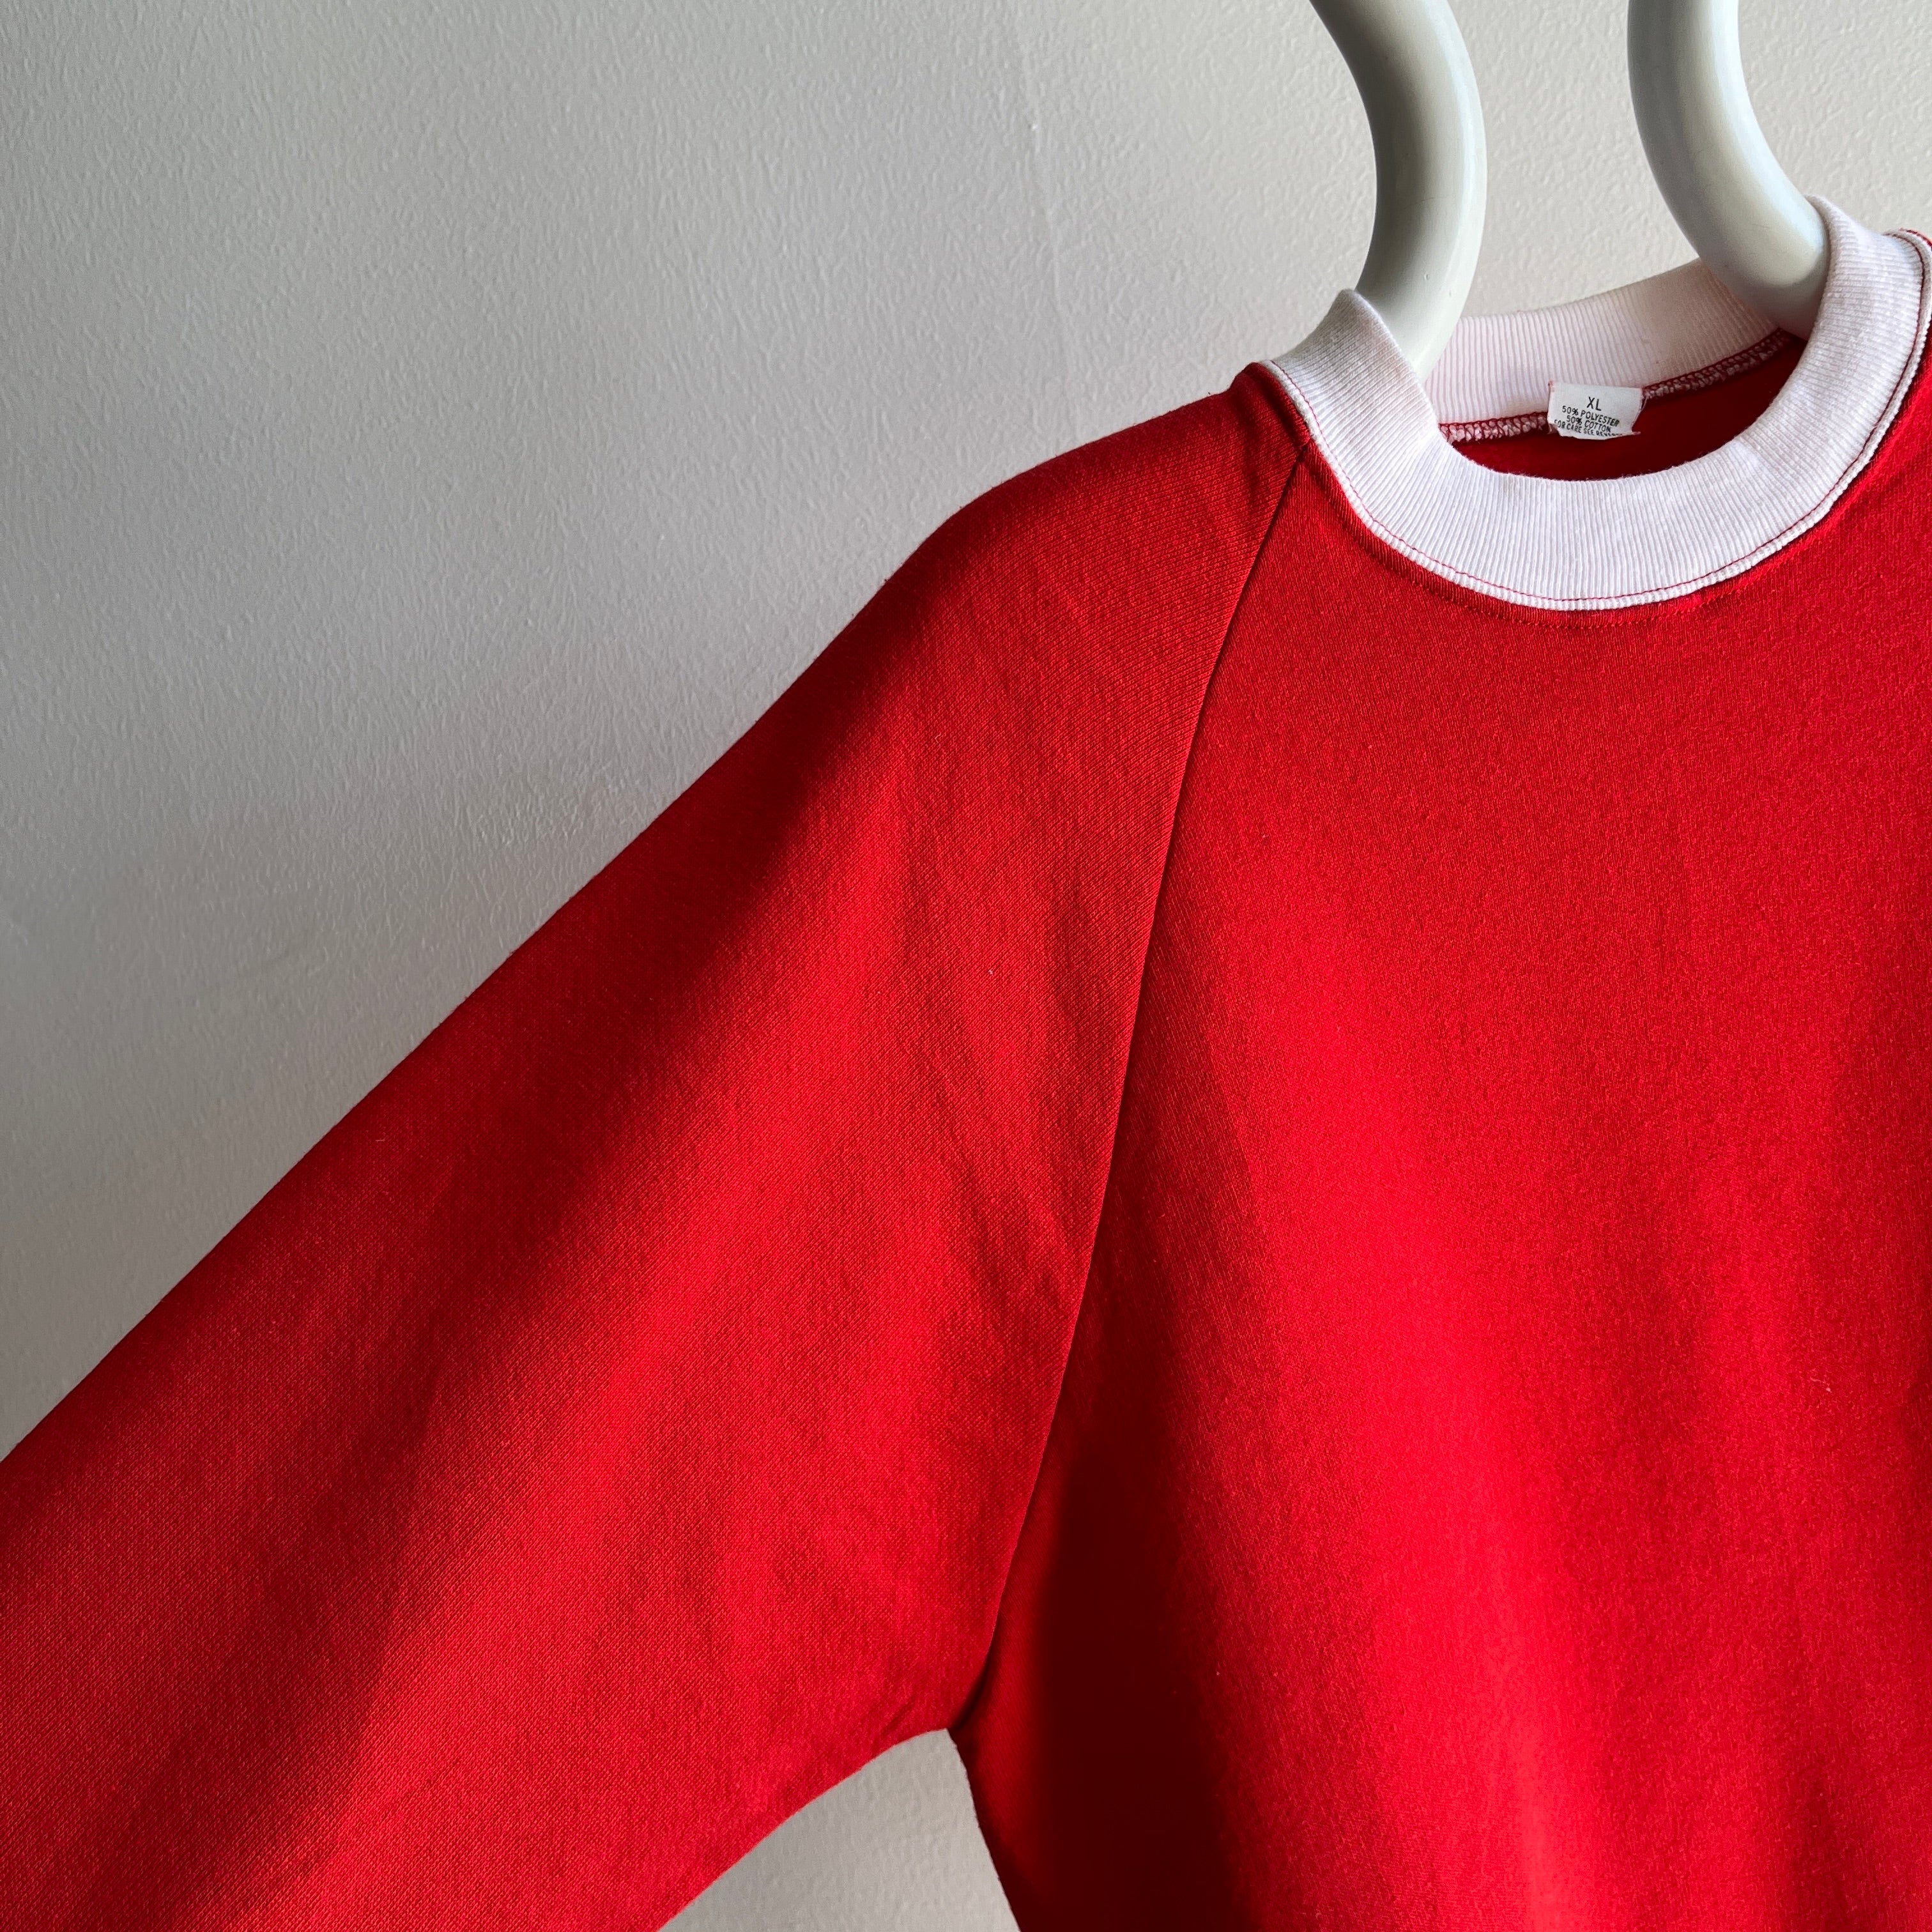 1980s Red Sweatshirt with Contrast White Cuffs and Collar - Oh My!